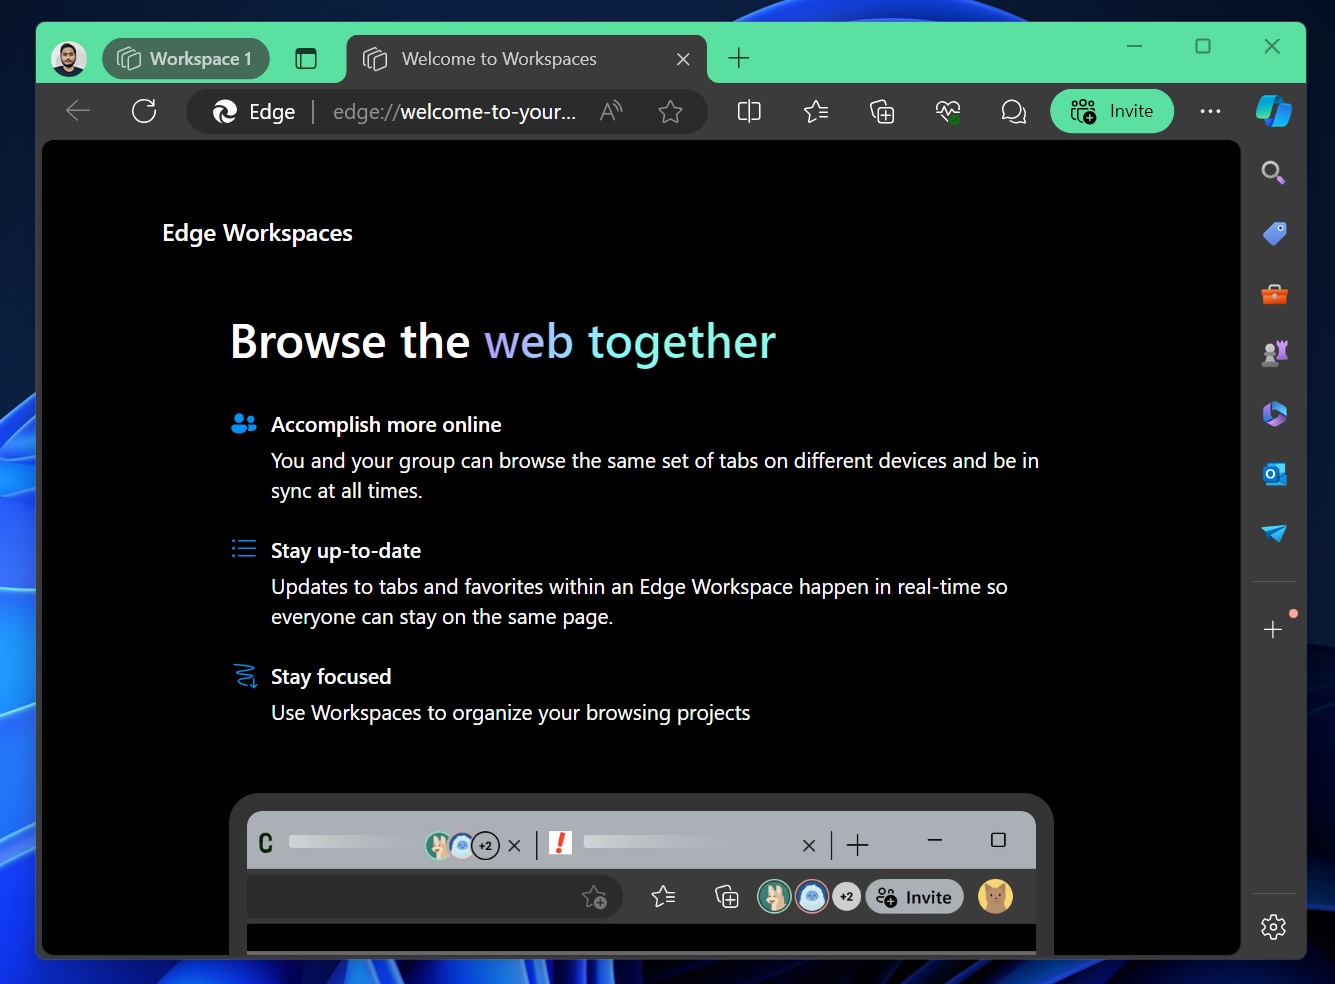 Microsoft Edge Introduces AI-Generated Workspaces with Bing Integration